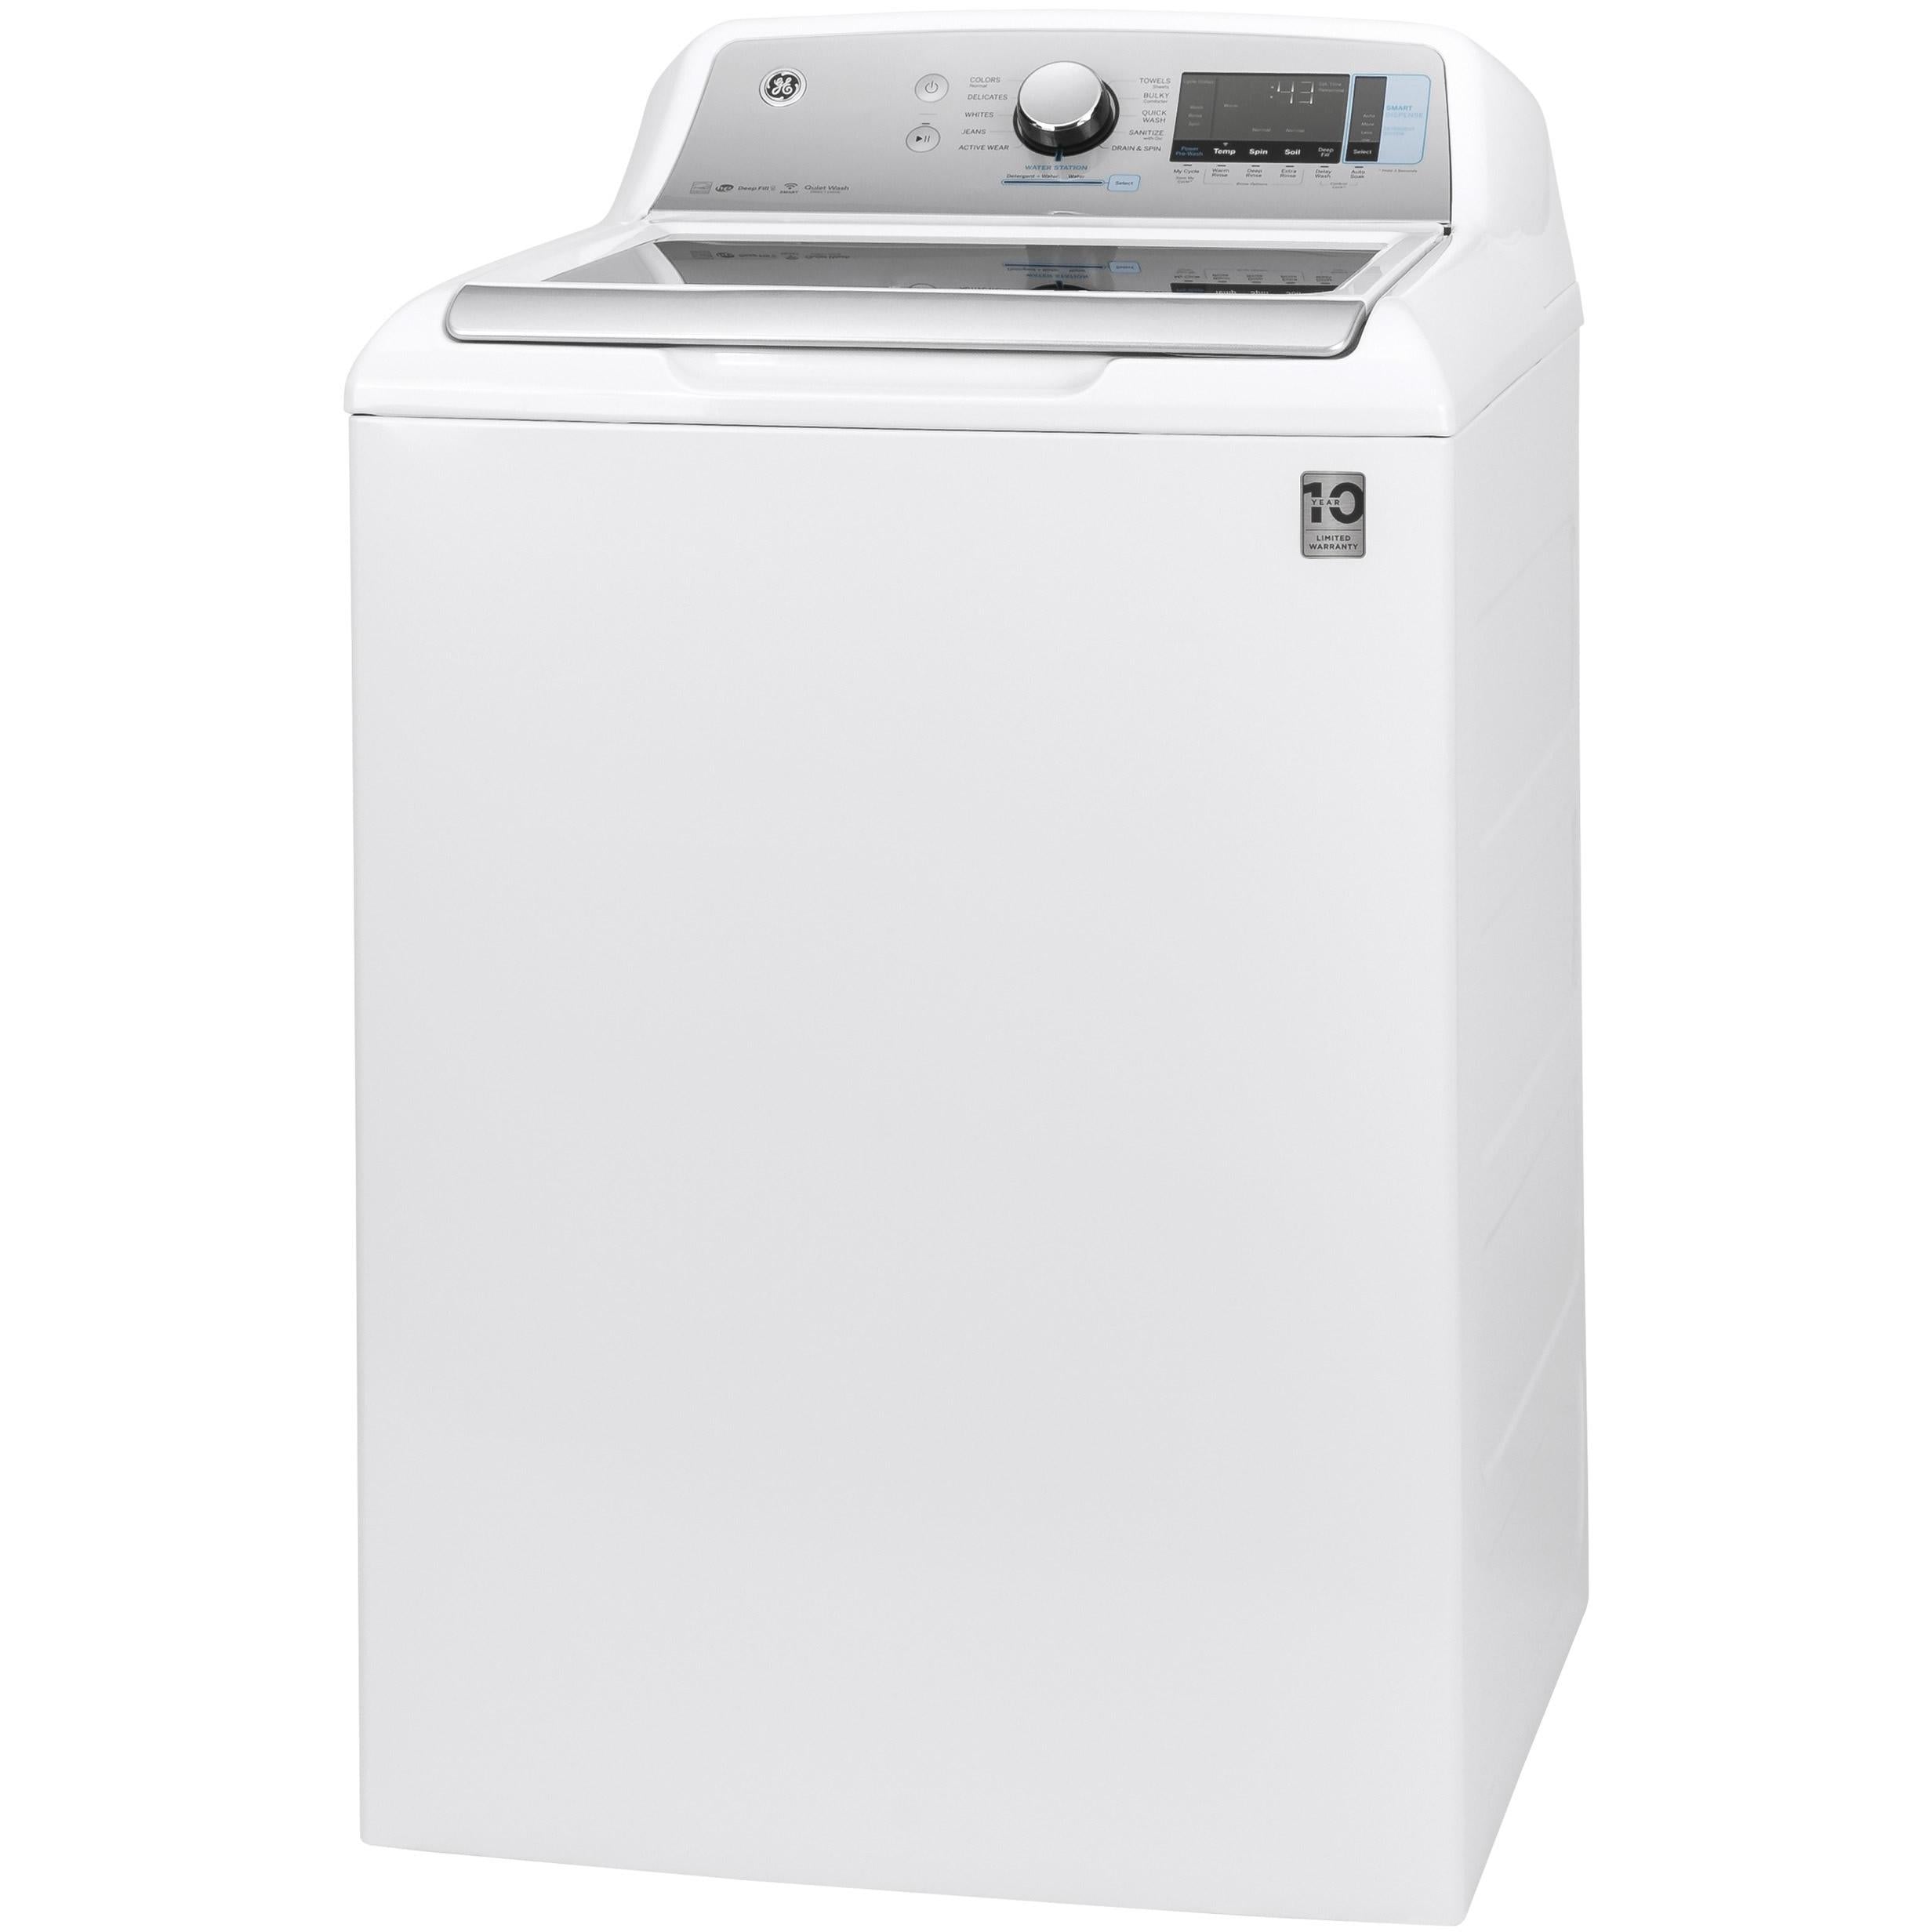 GE 5.2 cu. ft. Top Loading Washer GTW840CSNWS